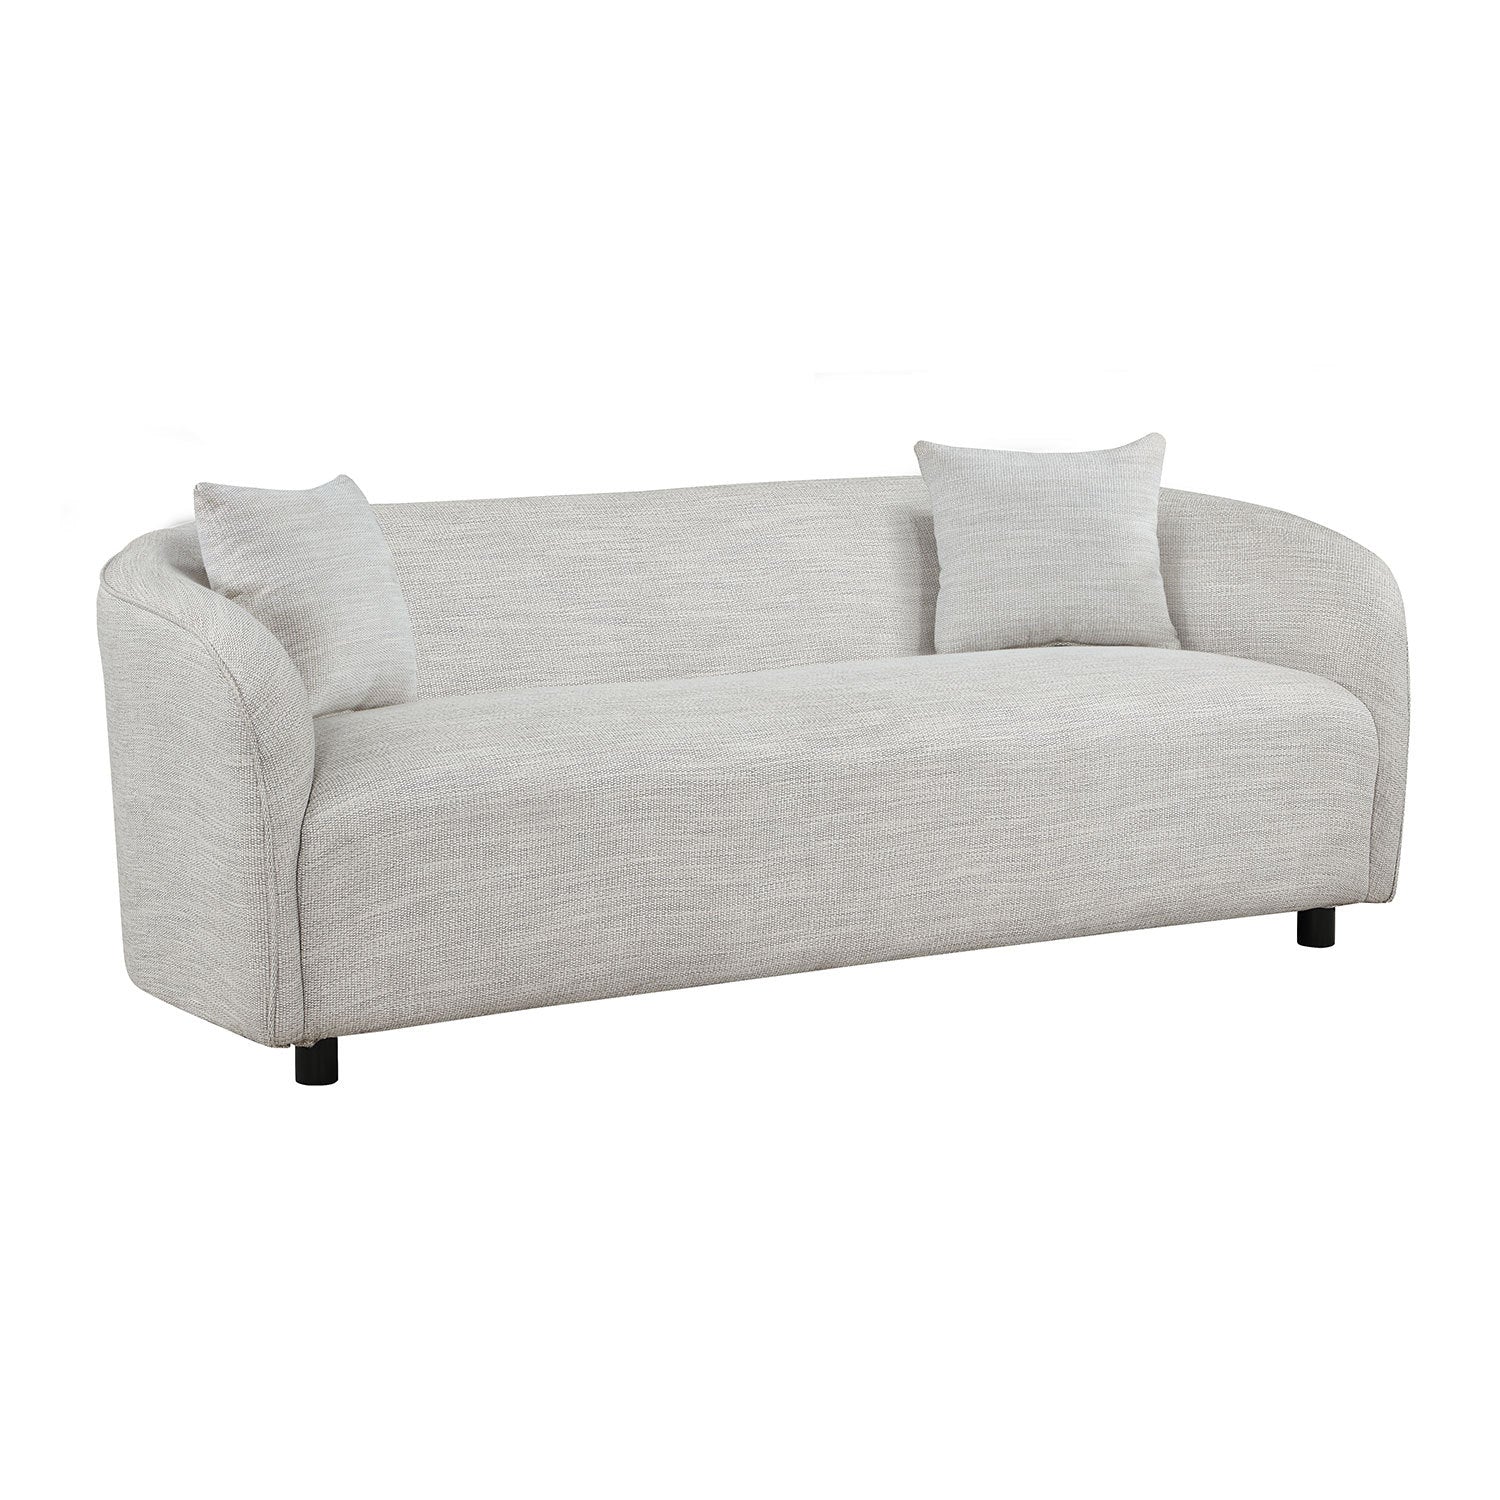 3 Seater Sofa Comfy Sofa for Living Room, Boucl Couch grey-fabric